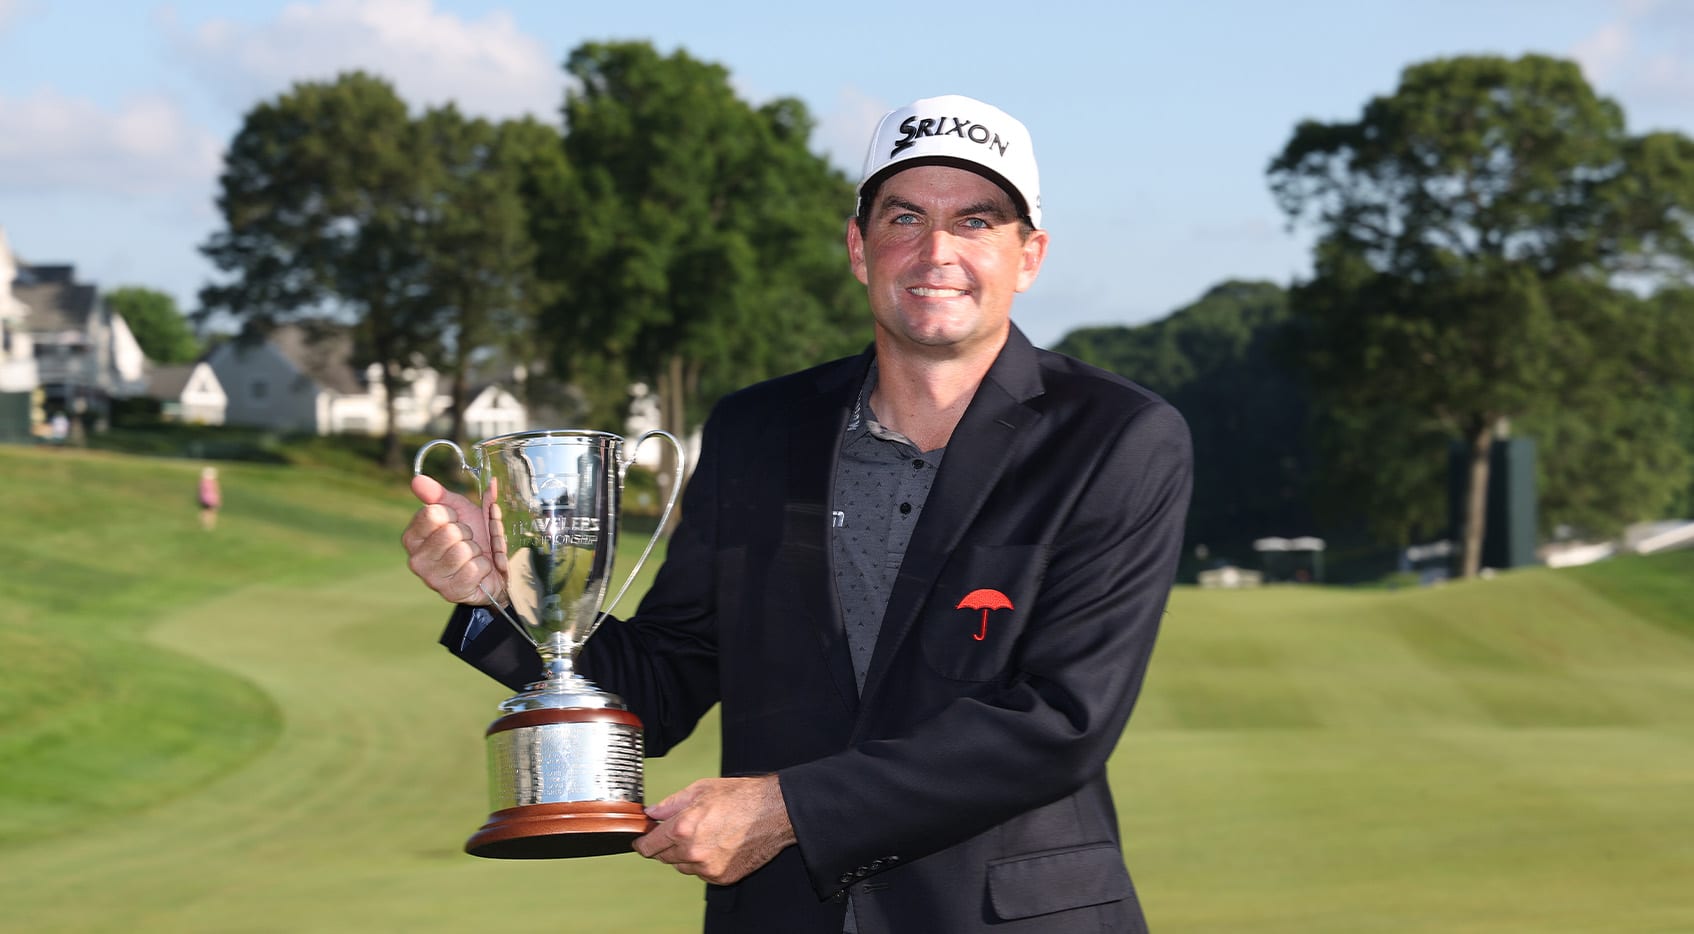 New England's Keegan Bradley comes full circle with Travelers title